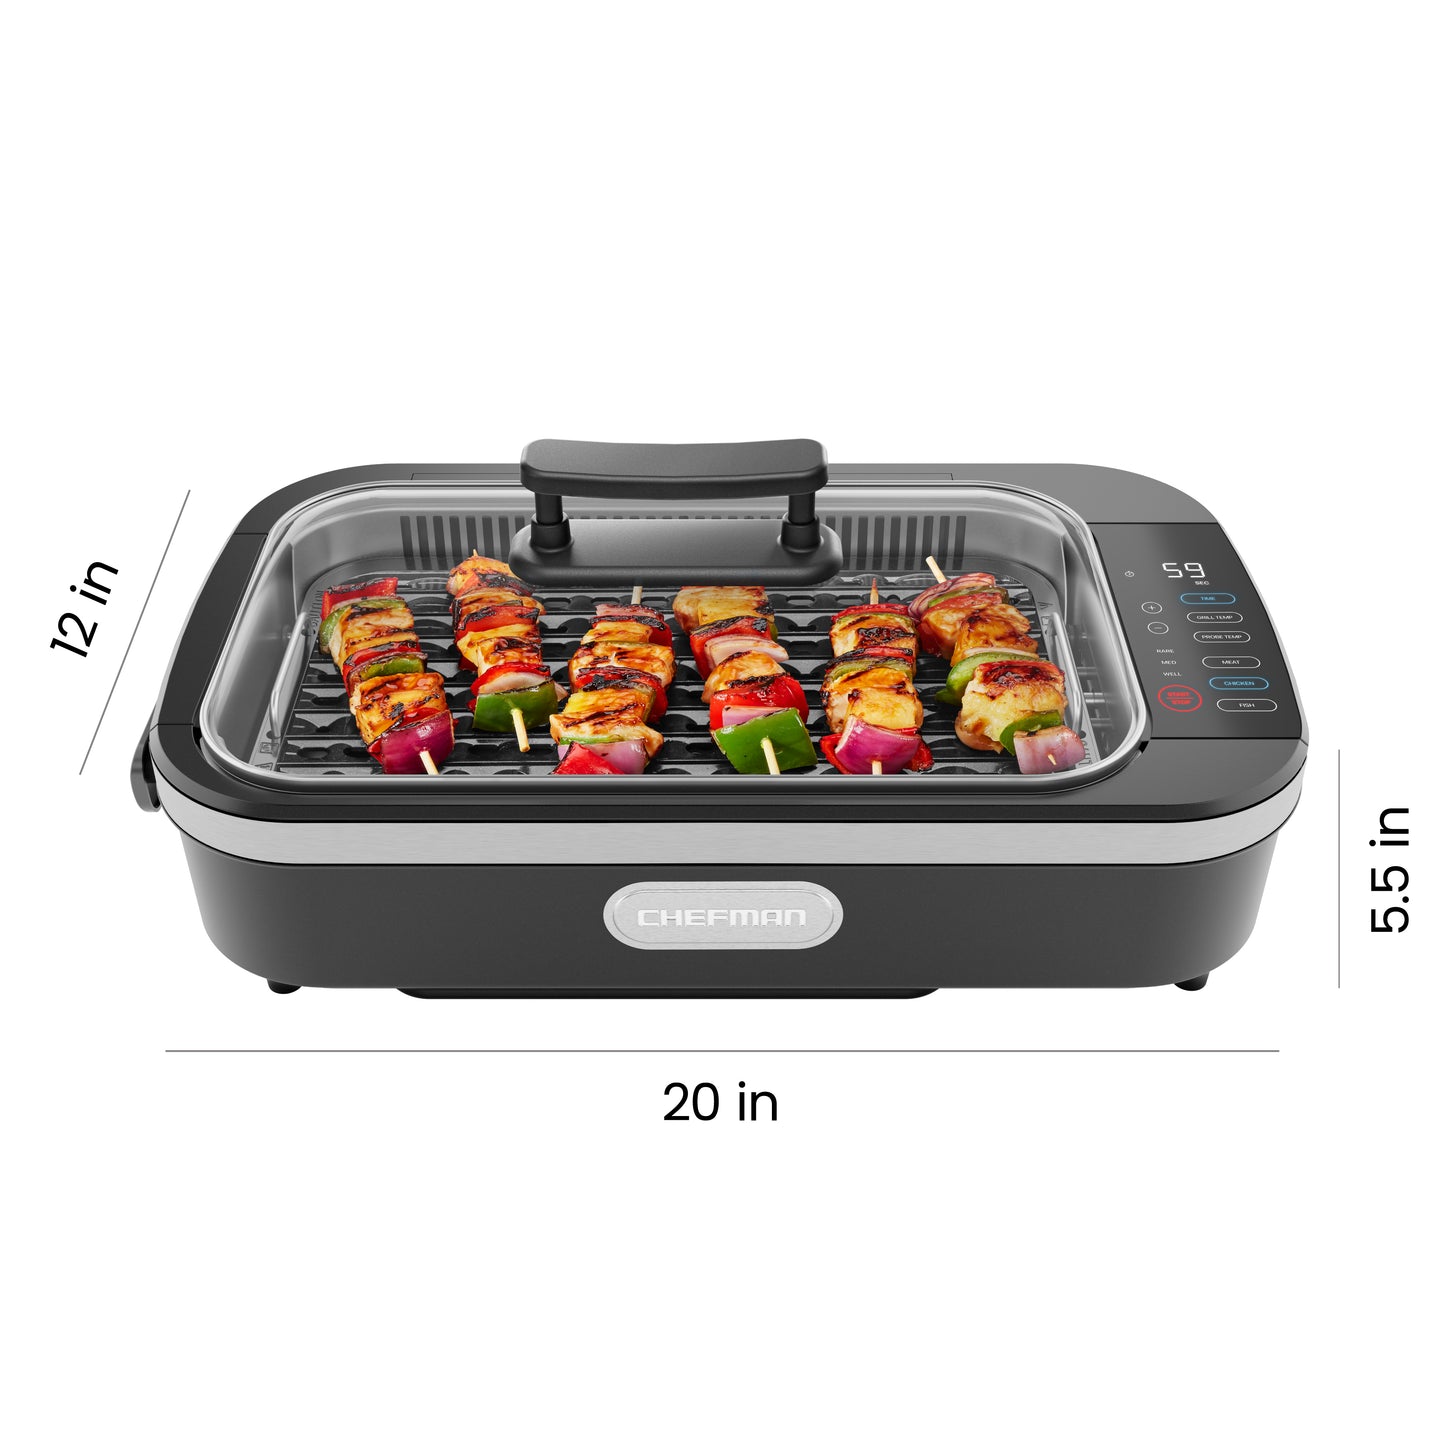 AccuGrill Smokeless Indoor Grill with Thermometer Probe